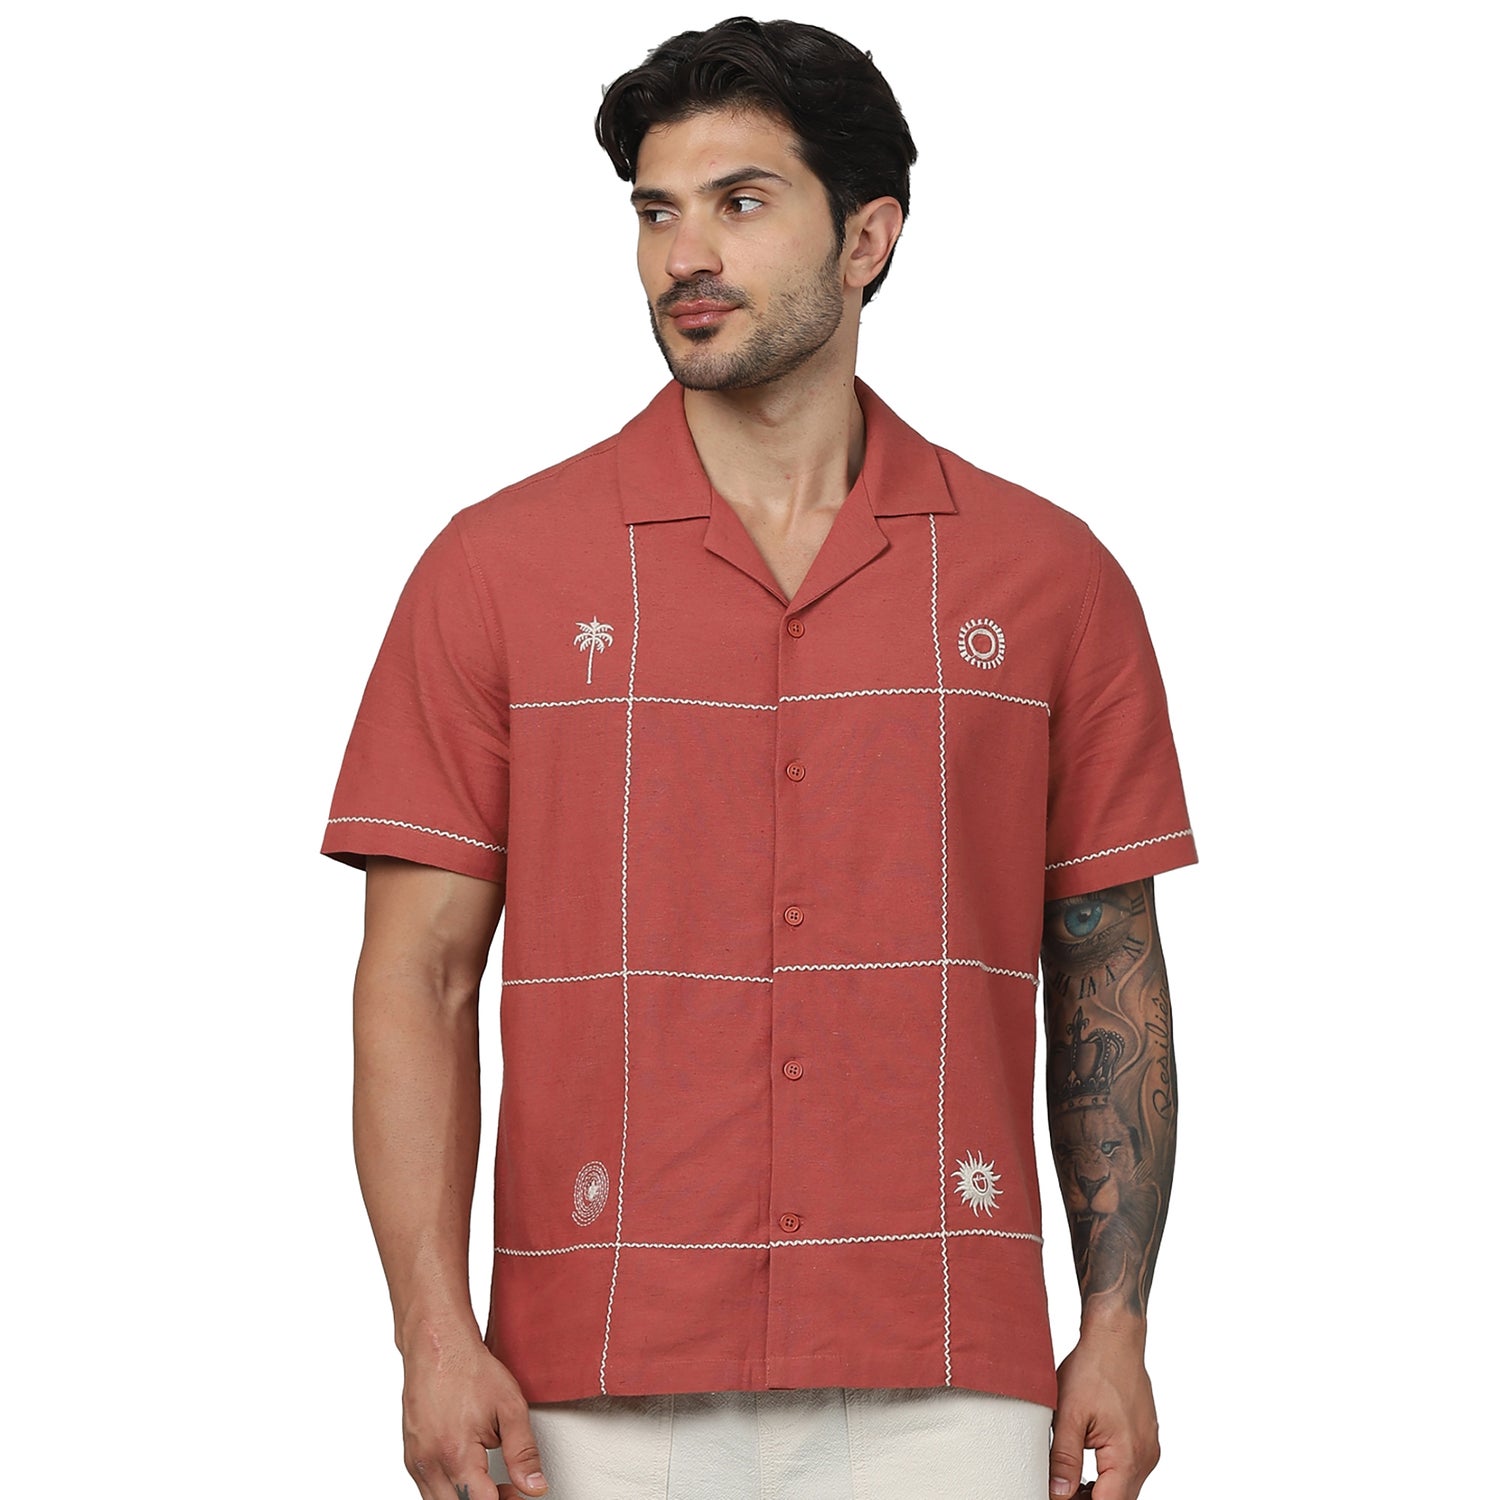 Men's Red Spread Collar Embroidered Regular Fit Viscose Rayon Casual Shirts (GAEMB4)